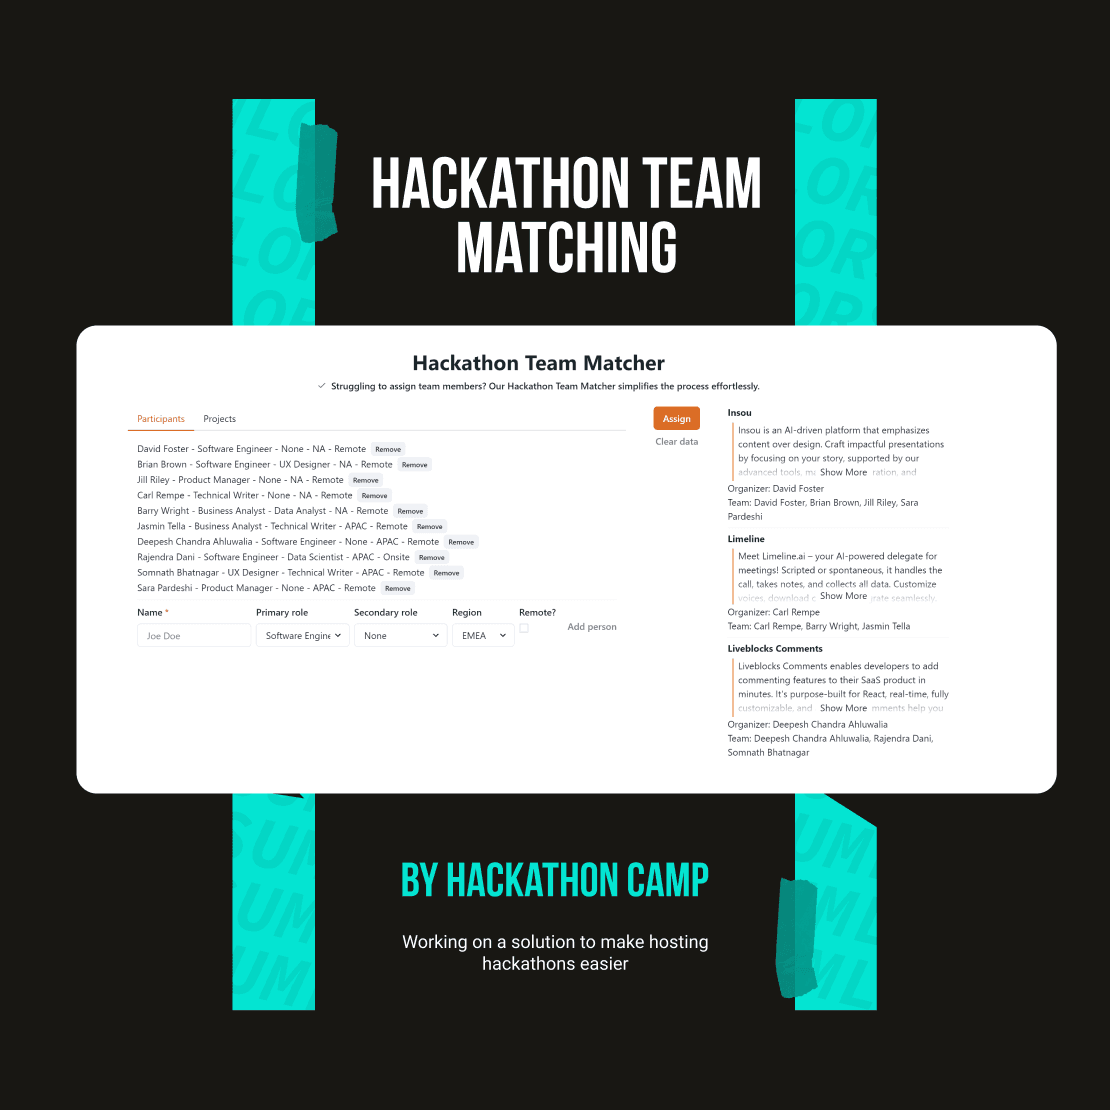 demo picture of a poster of a hackathon team